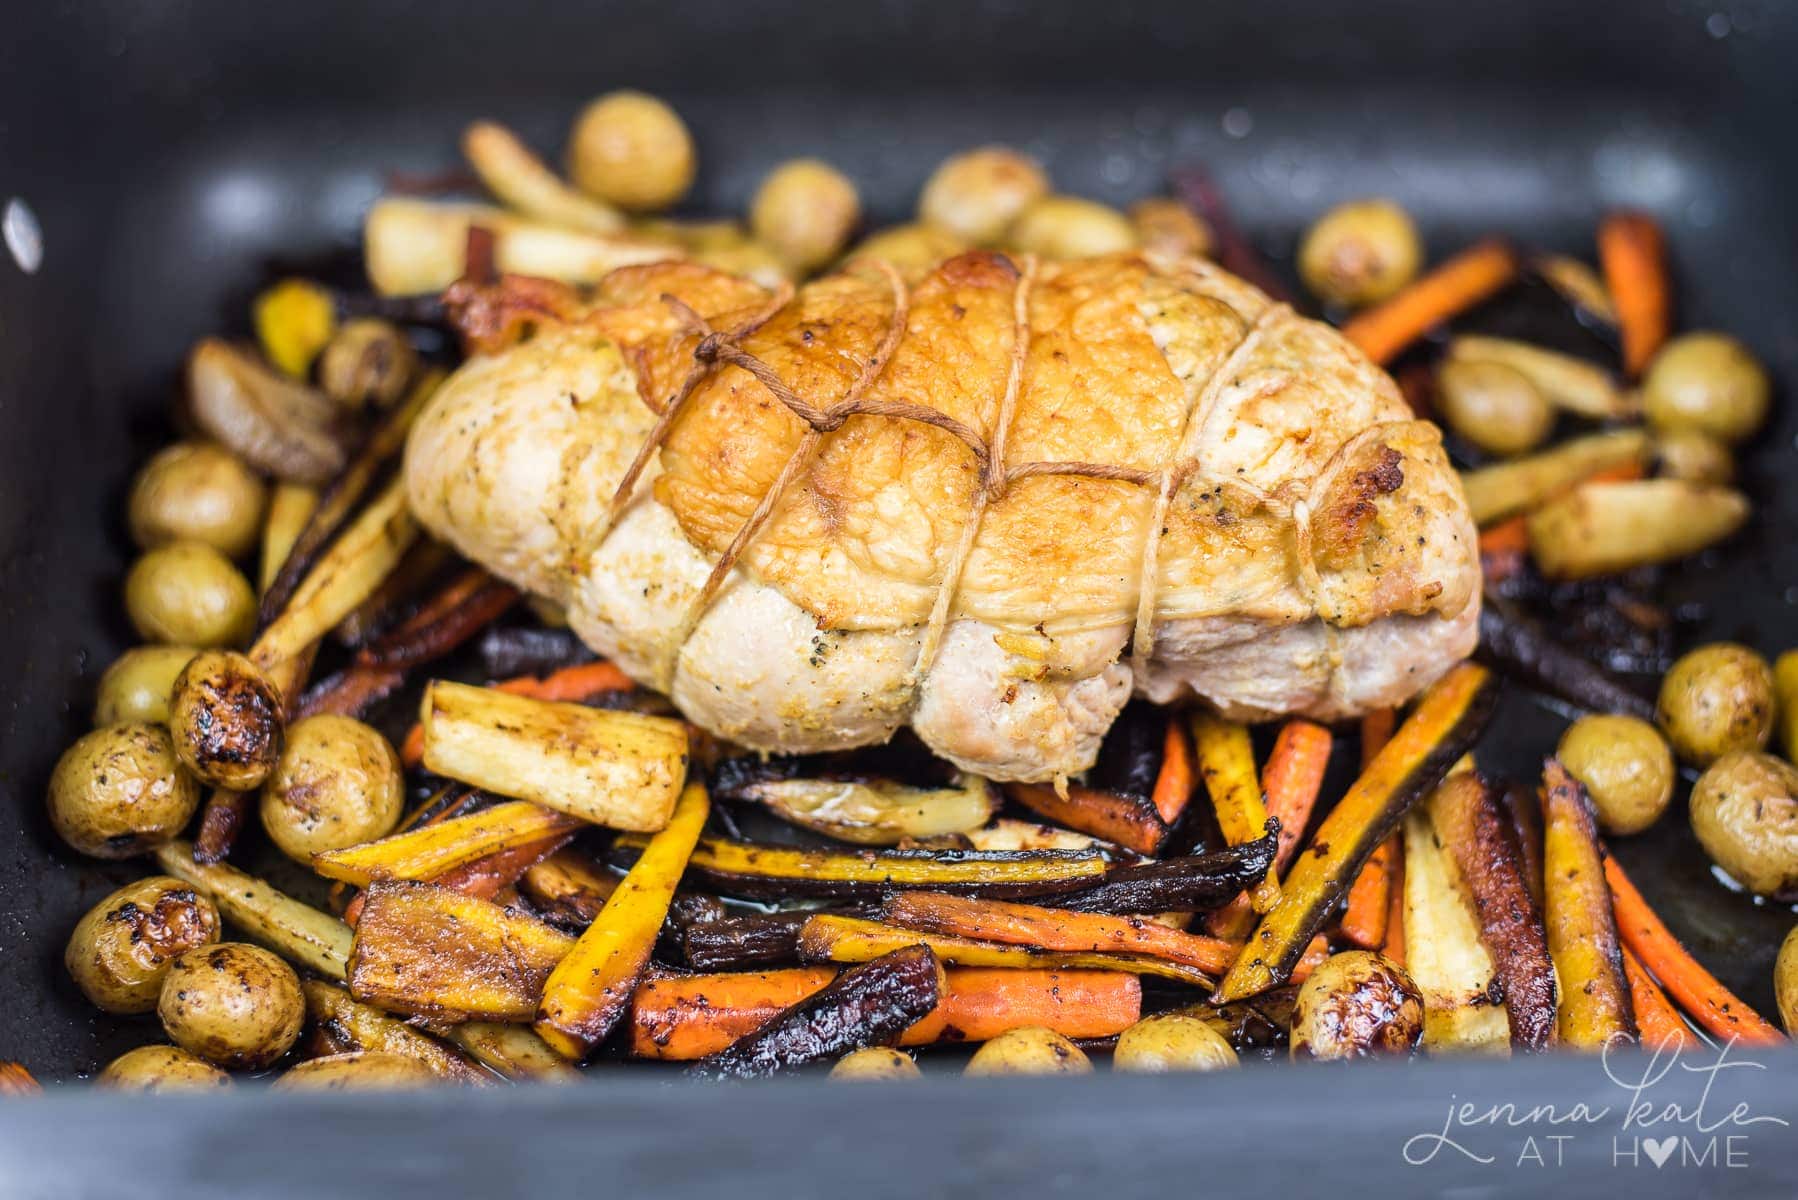 Tender and juicy turkey breast roasted with mixed vegetables is the perfect Thanksgiving dinner for 4